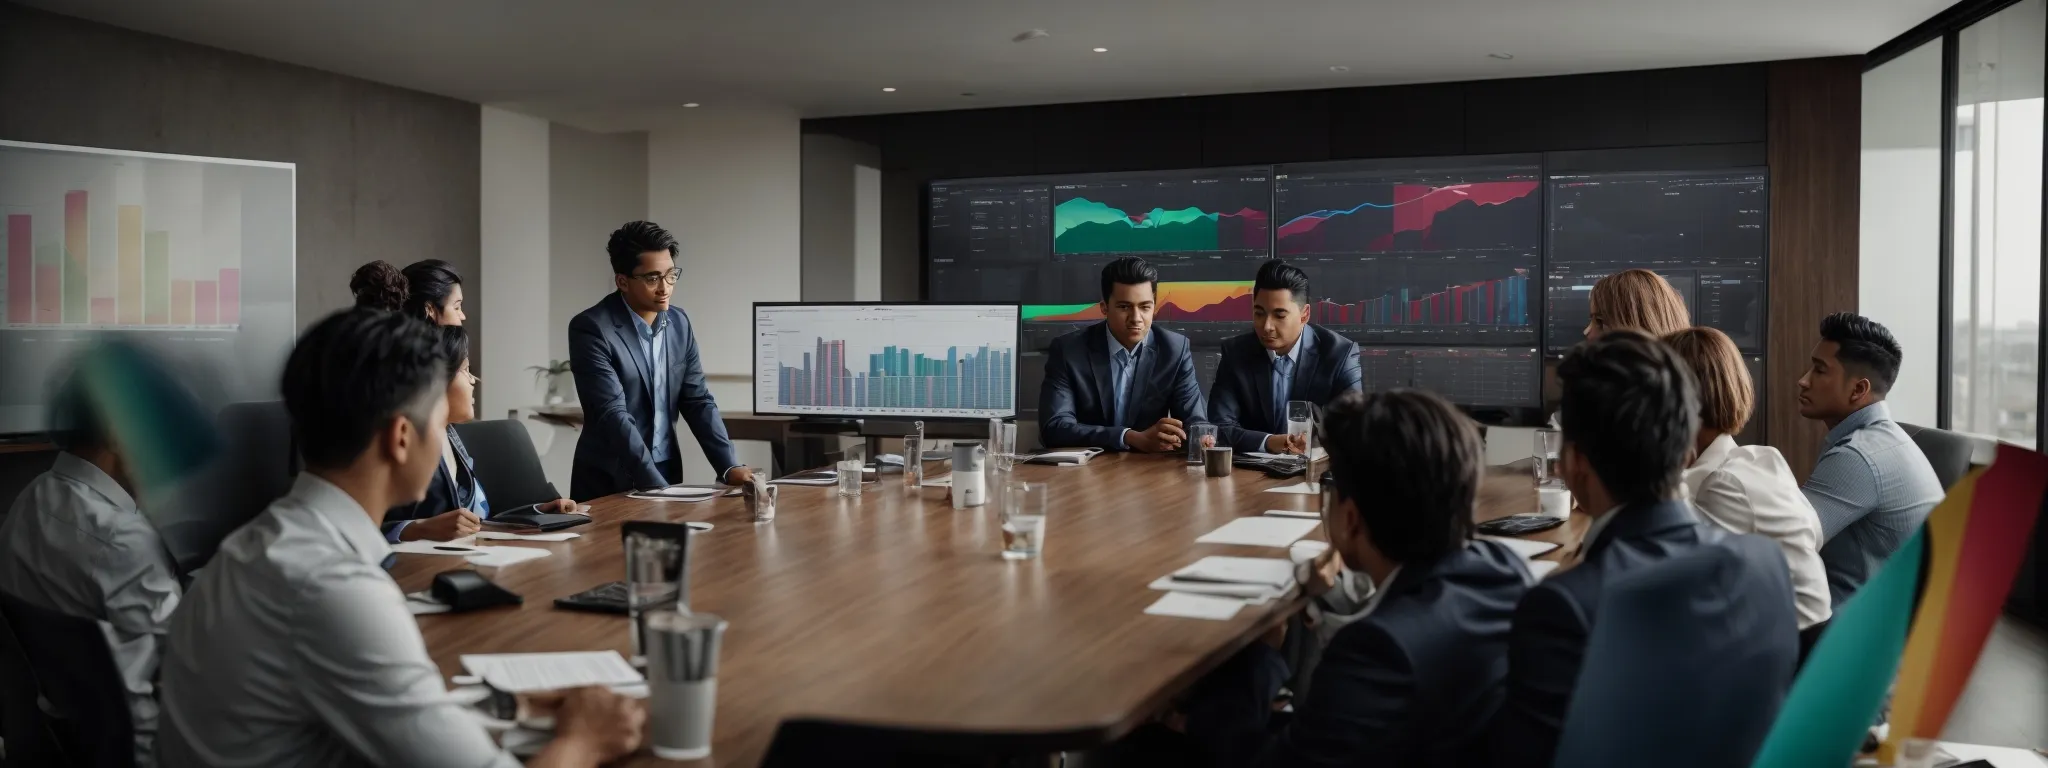 a team of marketing professionals gather around a conference table, intently focusing on a central laptop screen displaying colorful graphs and campaign metrics.